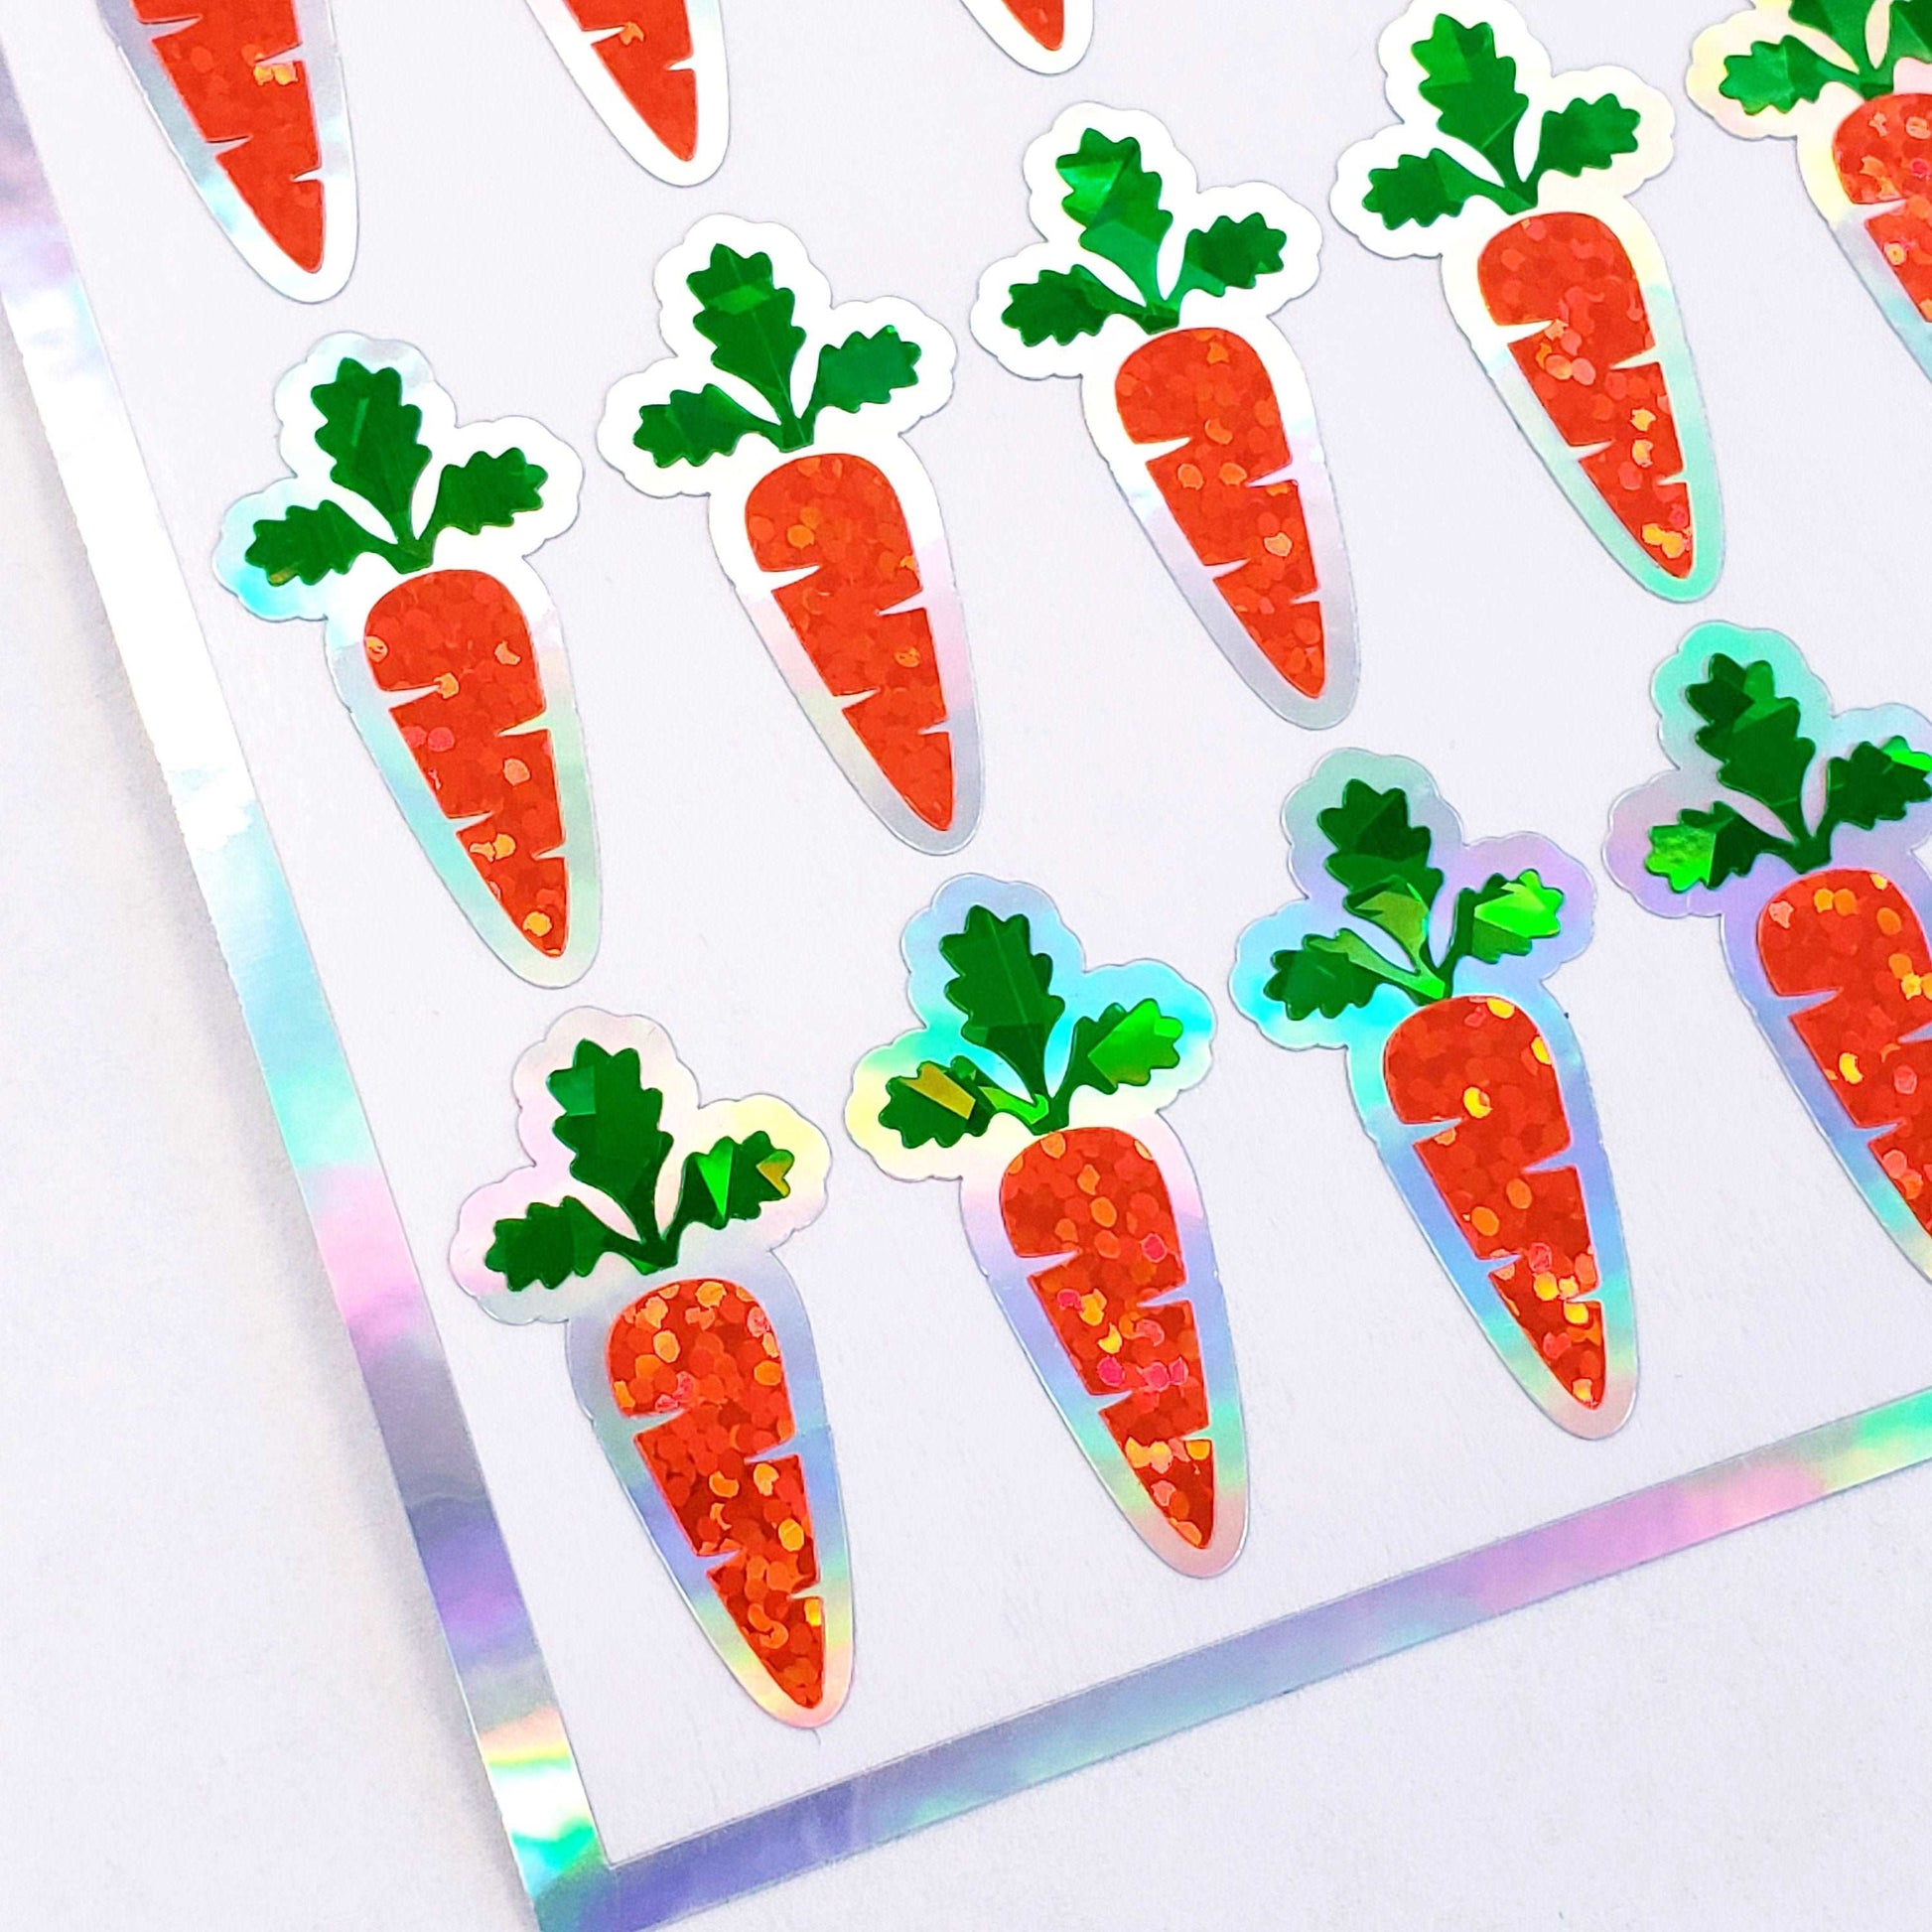 Carrot Stickers, set of 30 pretty orange and green sparkly carrot stickers for Easter basket gifts, calendars, planners and recipe cards.